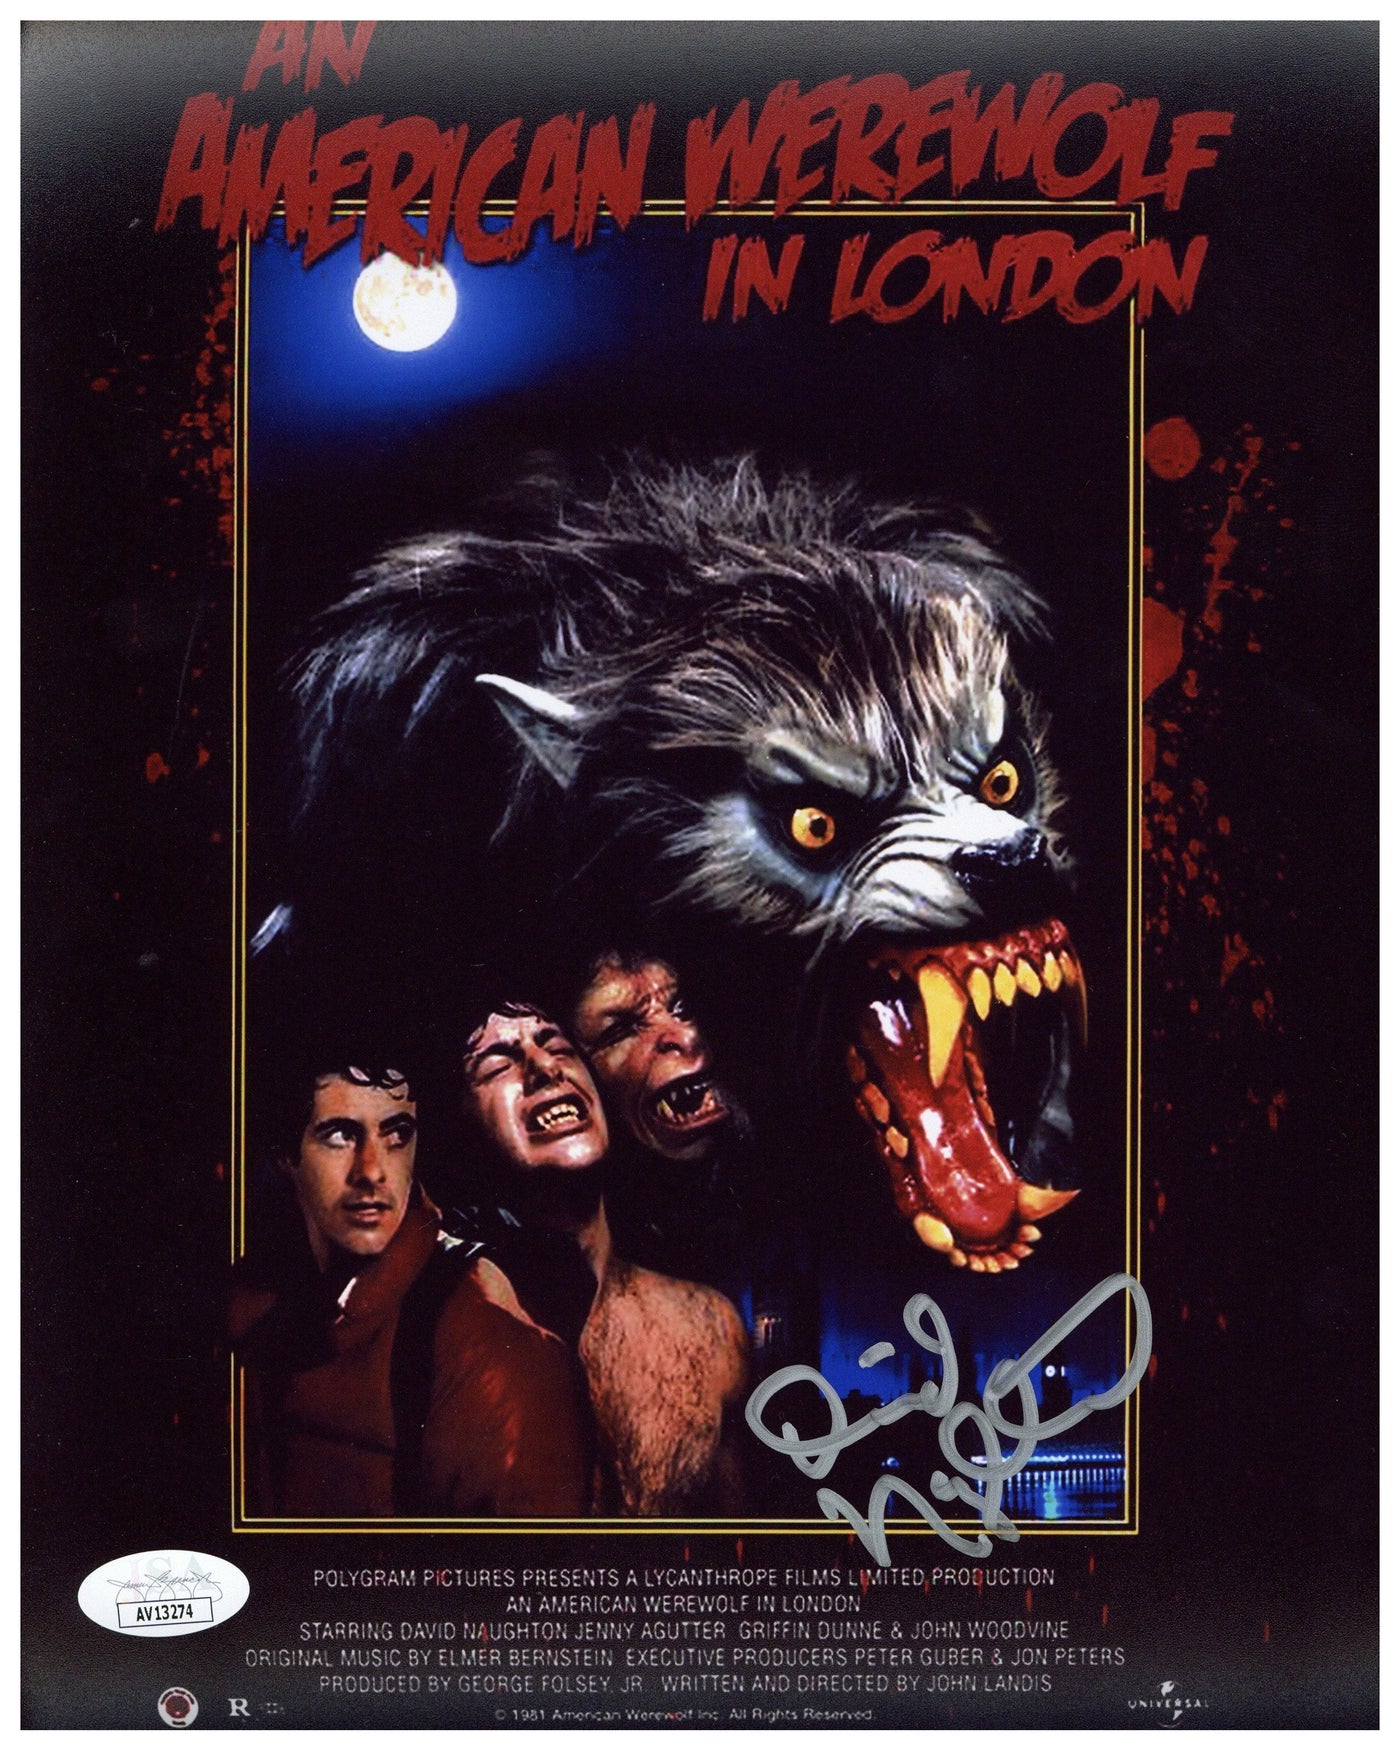 David Naughton Signed 8x10 Photo An American Werewolf in London Autographed JSA